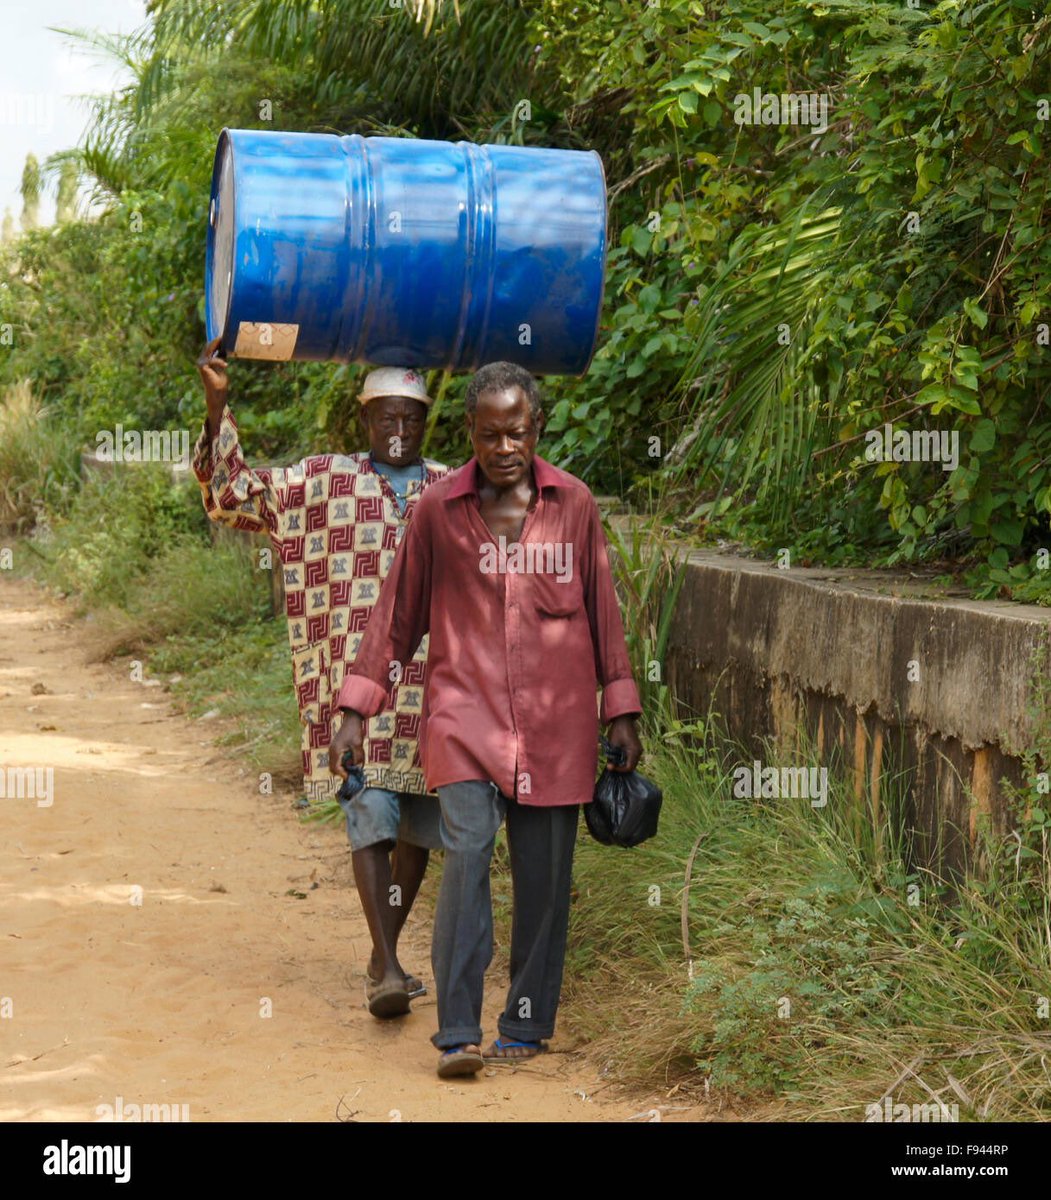 An image of an elite leaving the oil conference with his worker carrying a barrel of crude oil.